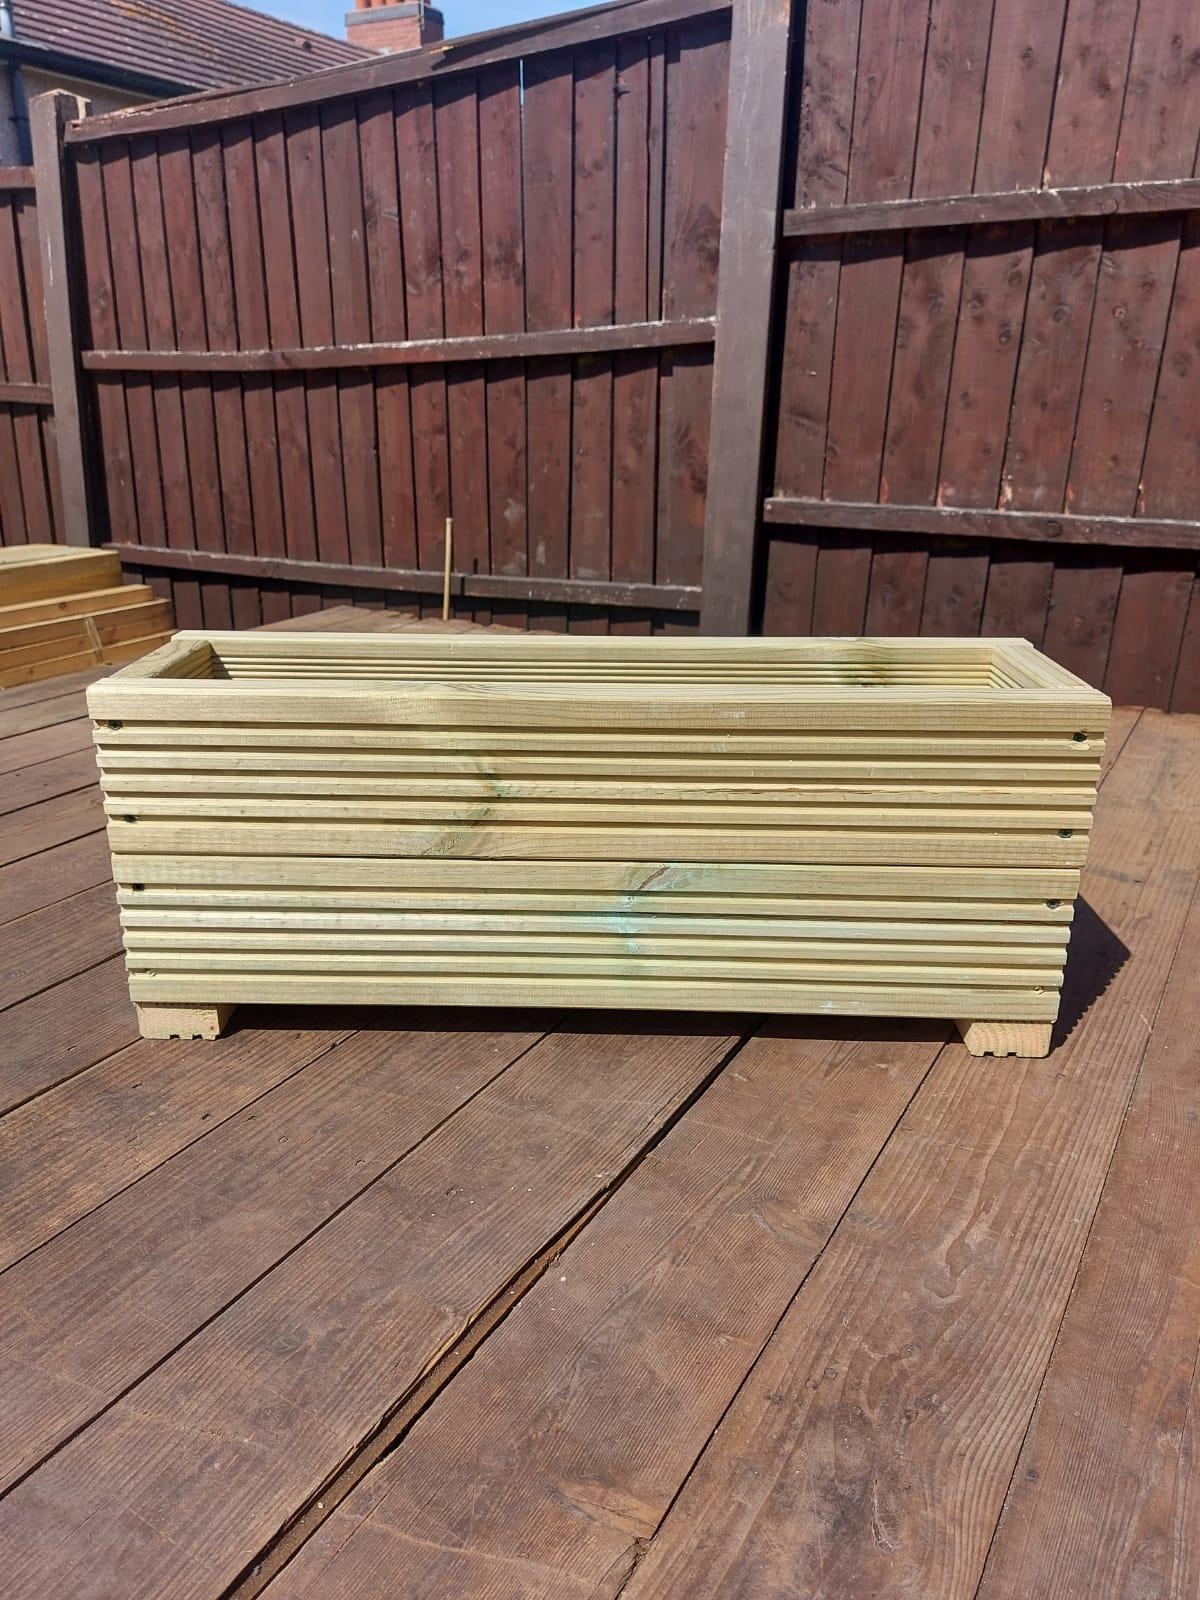 decking planter with fence in the background on a decked base